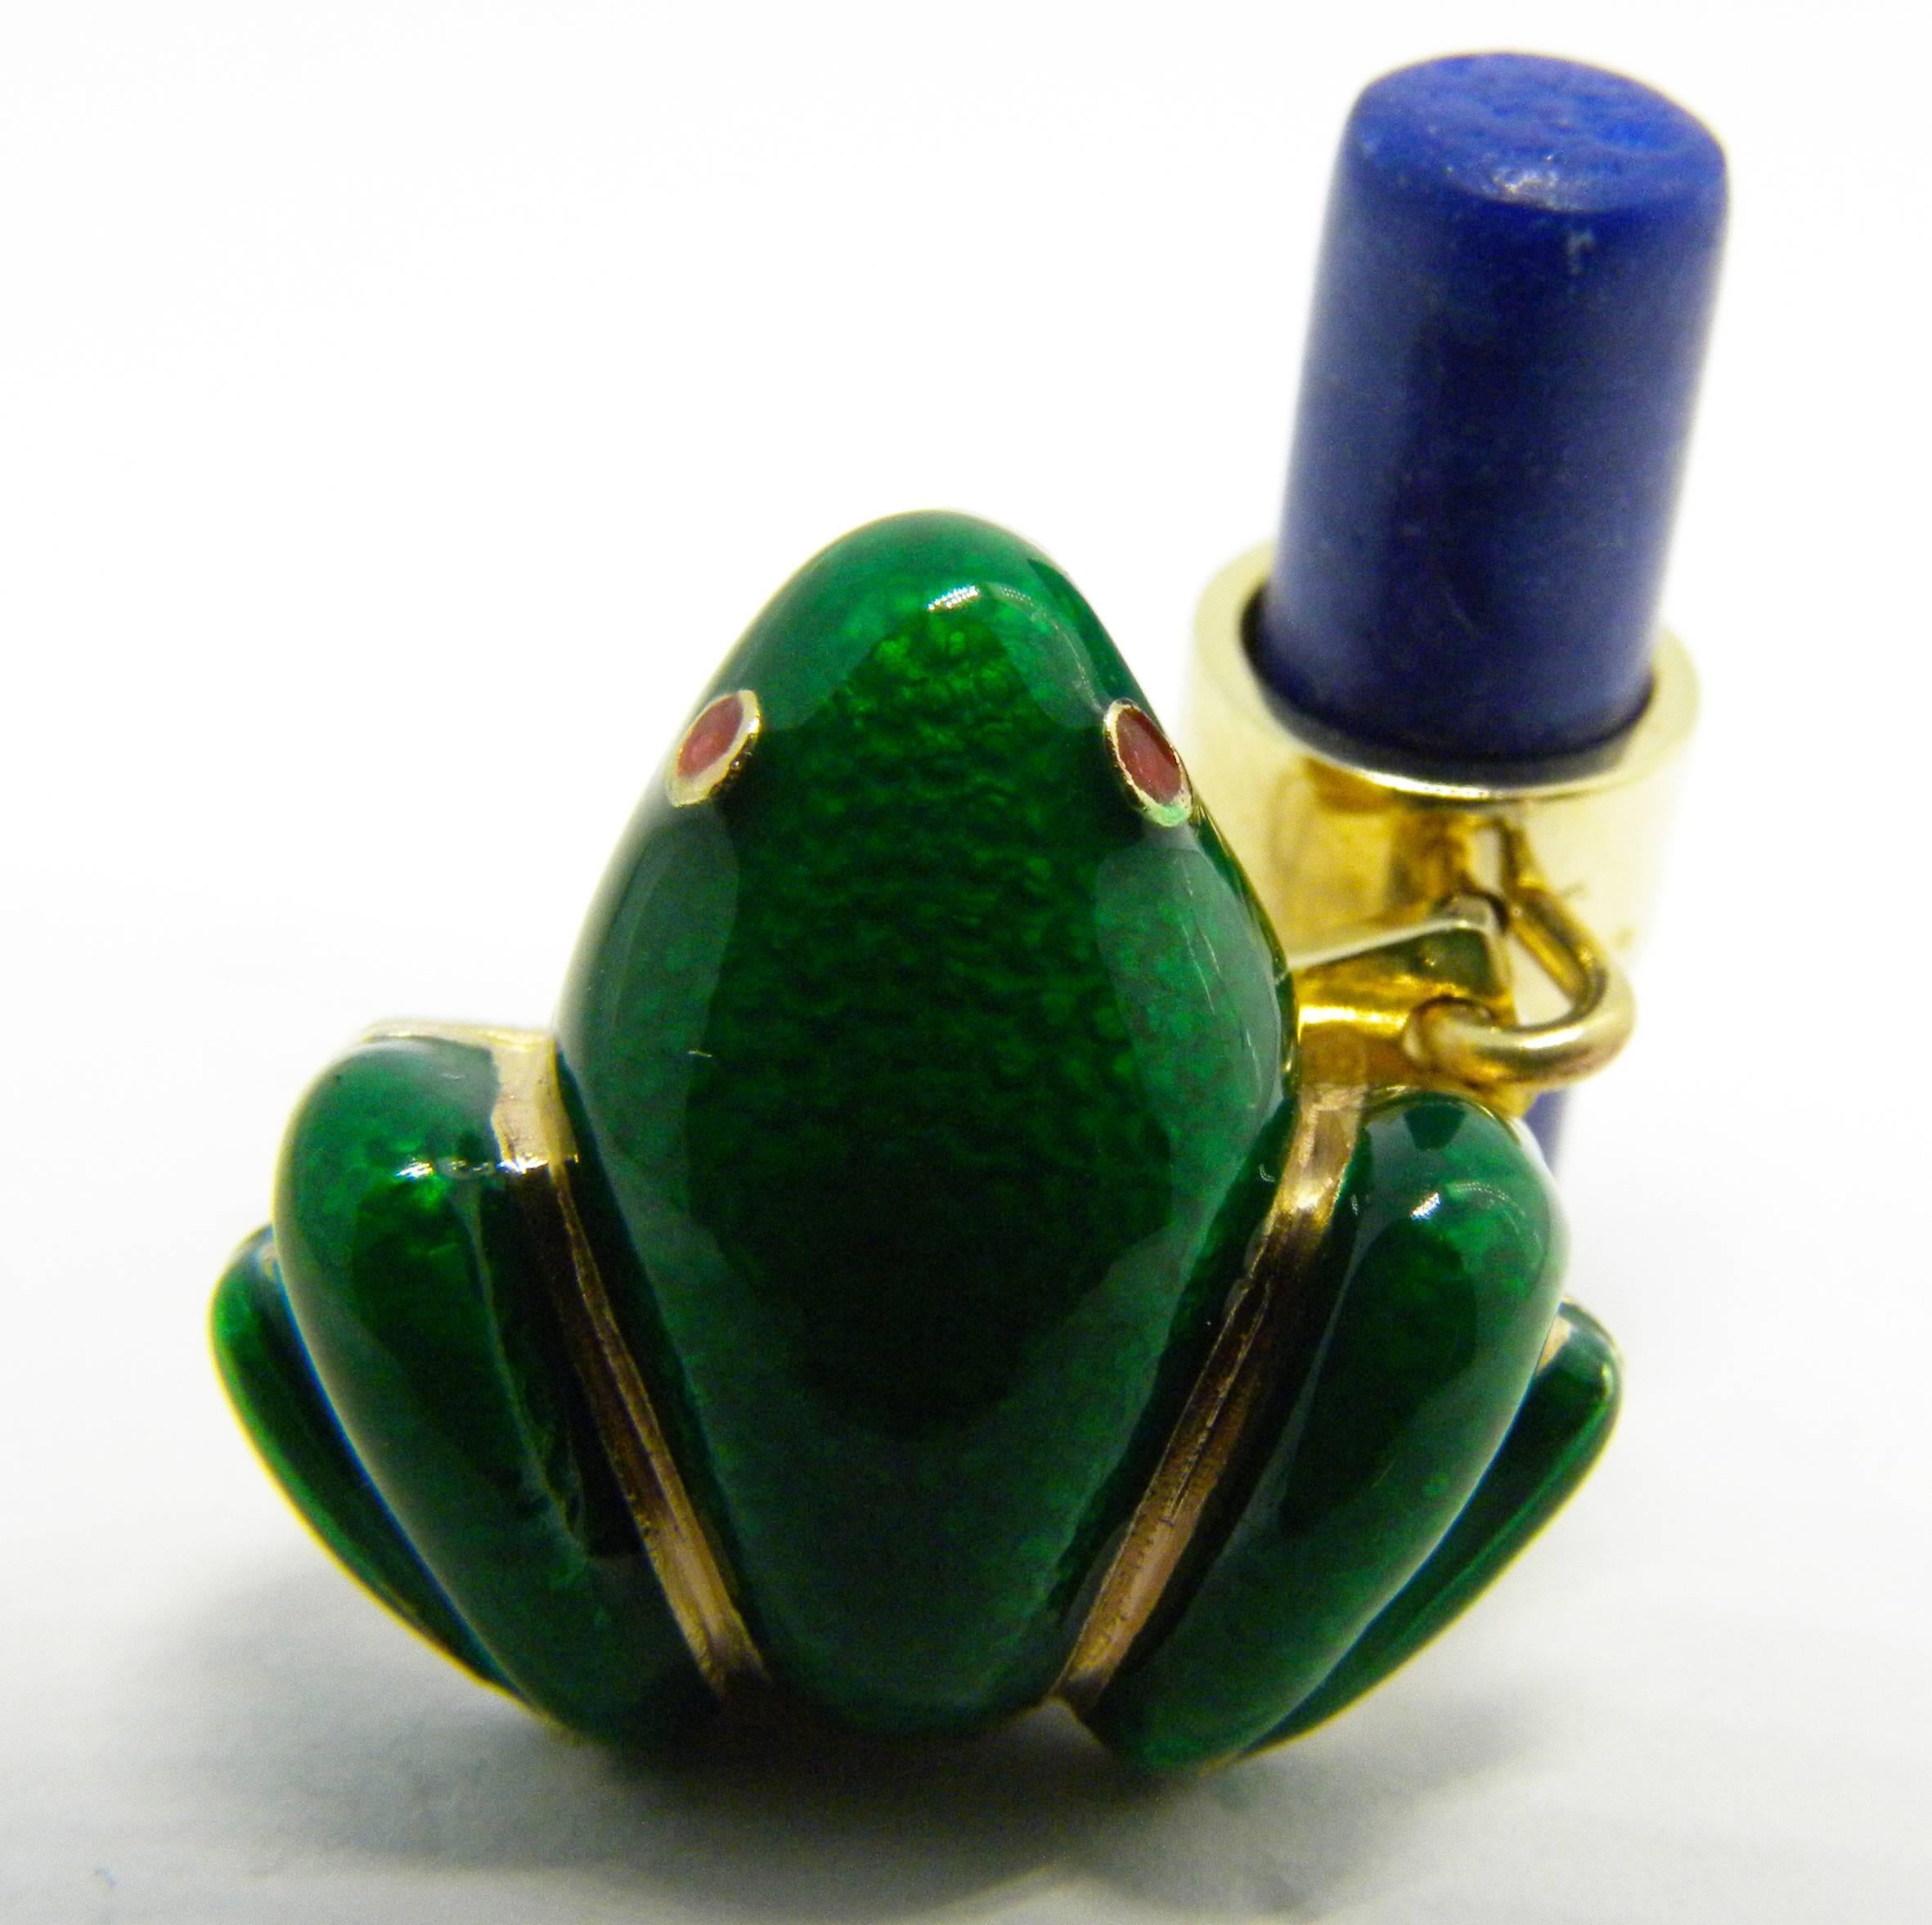 Unique and chic Green Hand Enameled  Frog Shaped Natural Lapis Lazuli Stick Back, yellow Gold Cufflinks.
In our smart fitted box and pouch.
